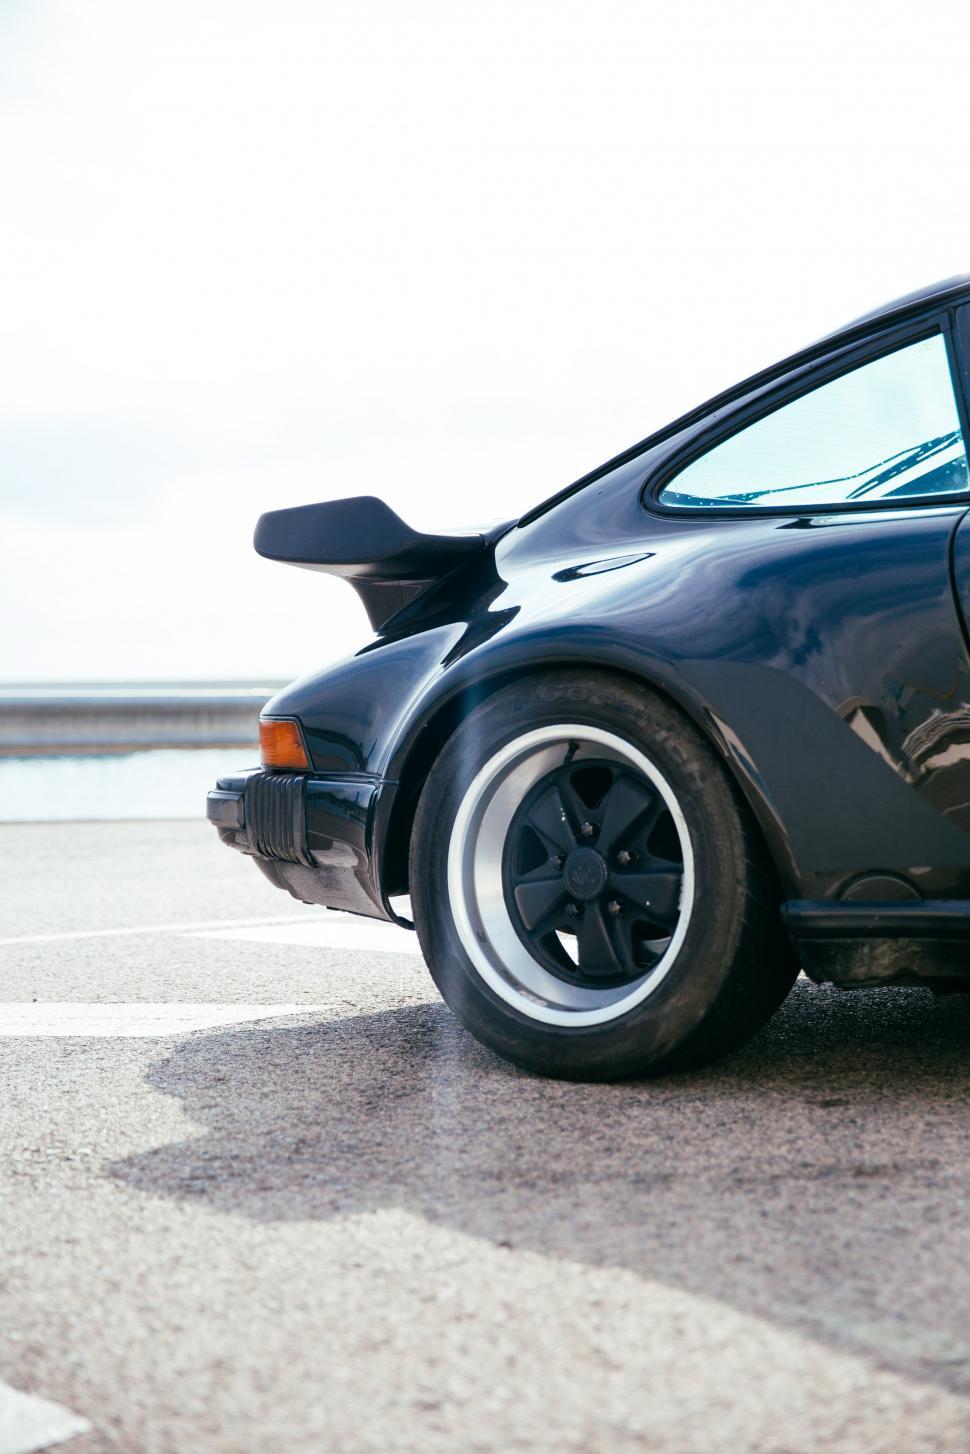 Free Stock Photo of Side view of a black sports car rear wheel and spoiler